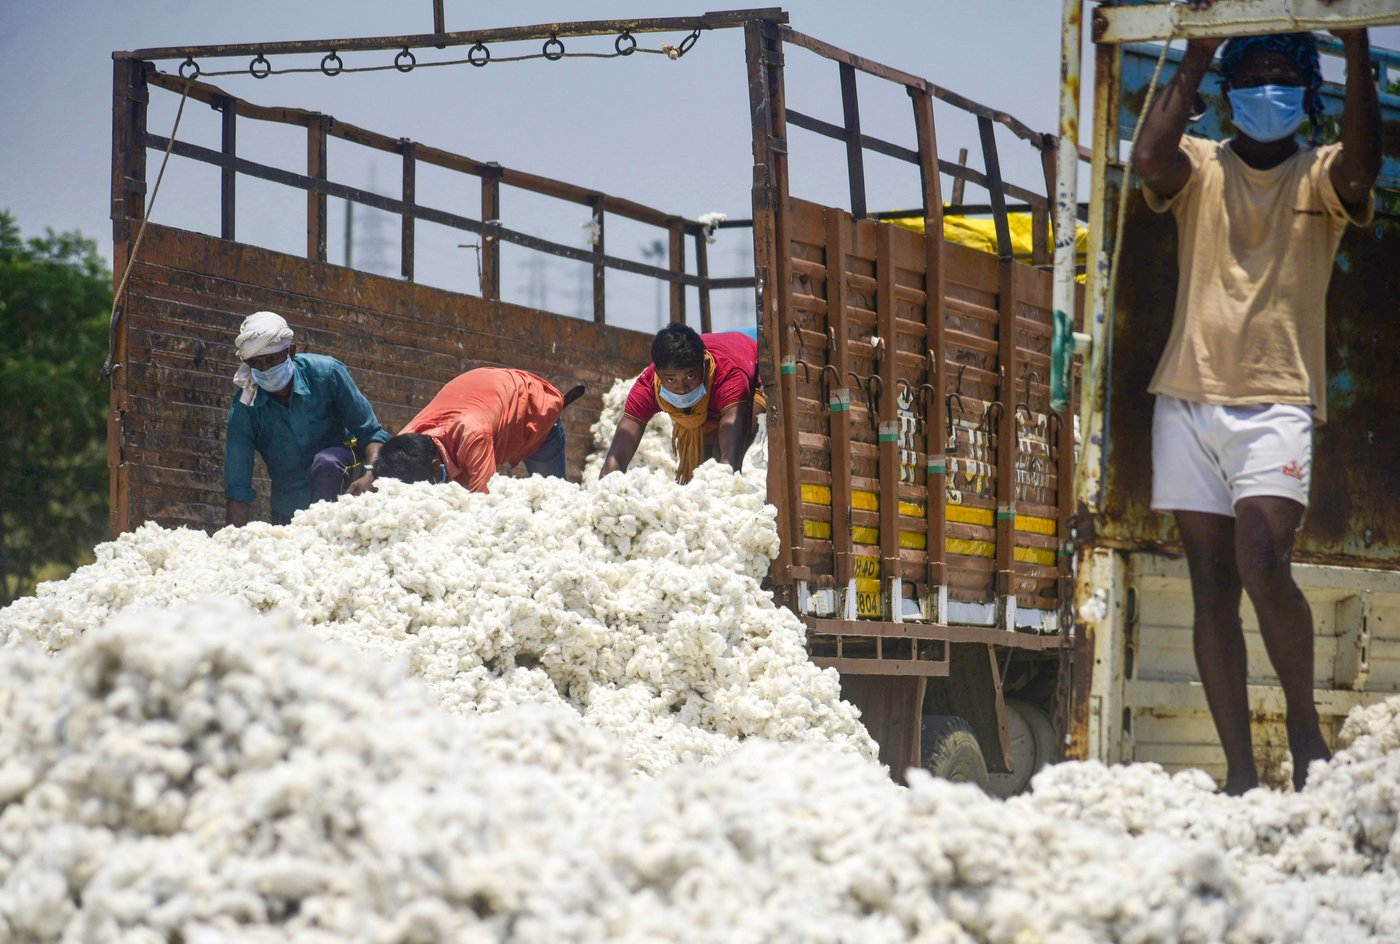 Huge quantities of cash crops lie unsold across India – like cotton in Maharashtra. A hunger crisis looms, yet farmers in Vidarbha a plan to sow cotton, not food crops, once again this kharif season 